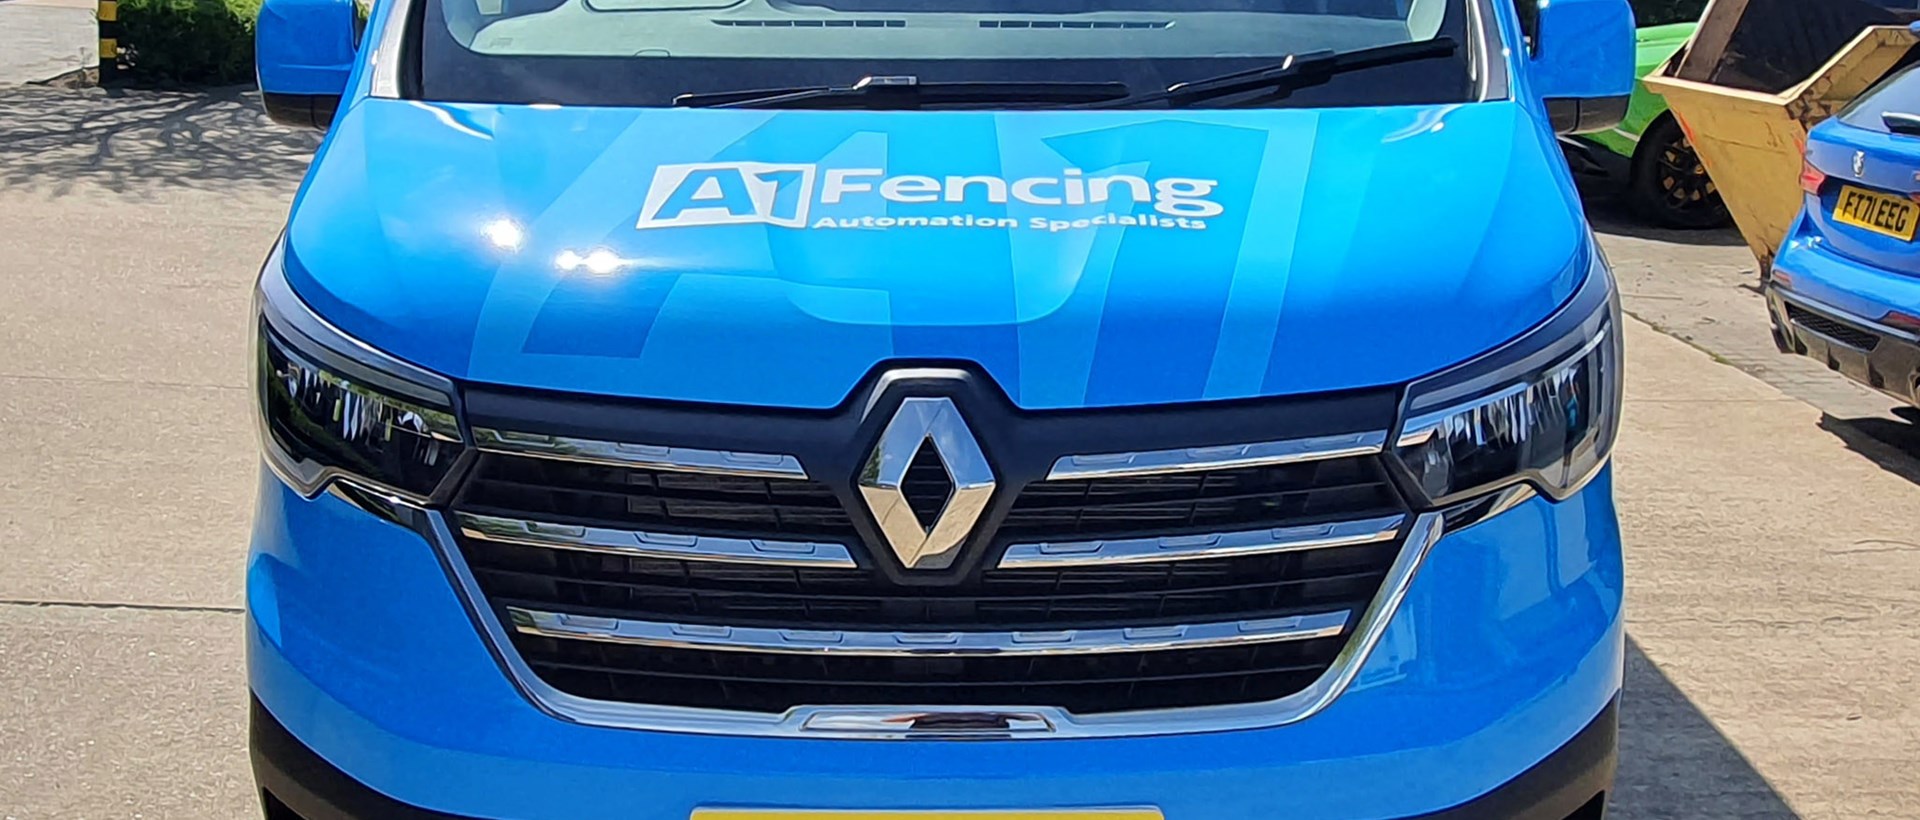 A1 Fencing wrapped bonnet view